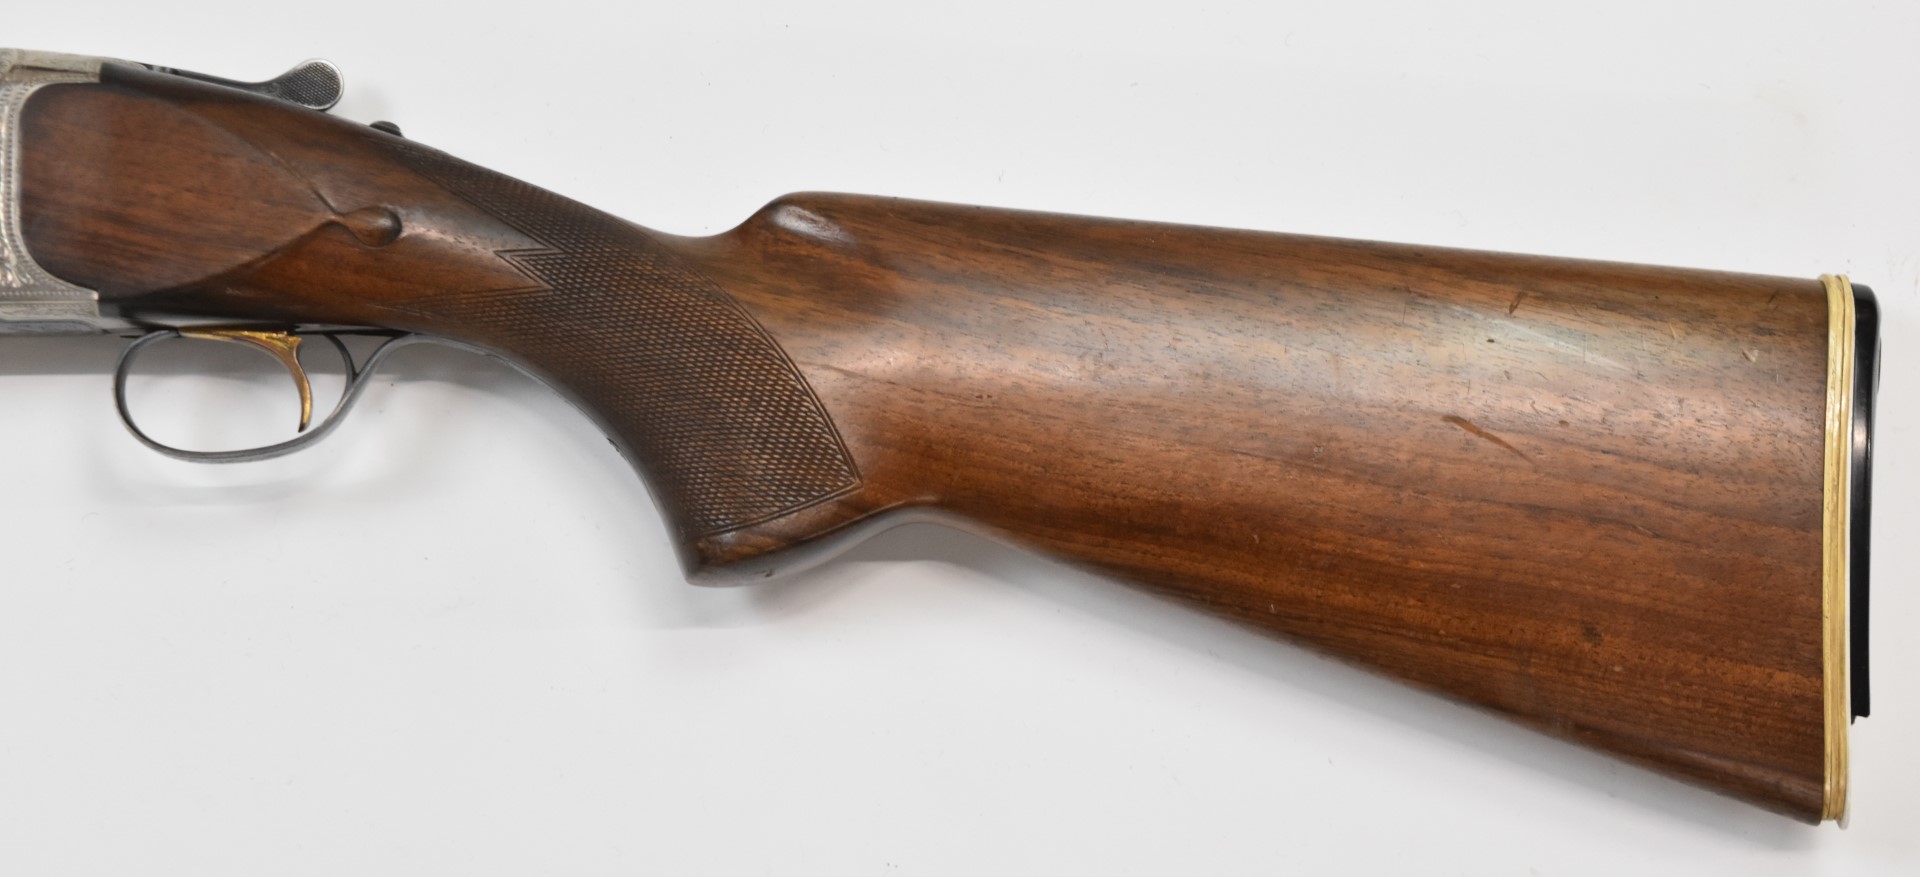 Miroku 12 bore over and under ejector shotgun with engraved locks, underside, trigger guard, top - Image 8 of 11